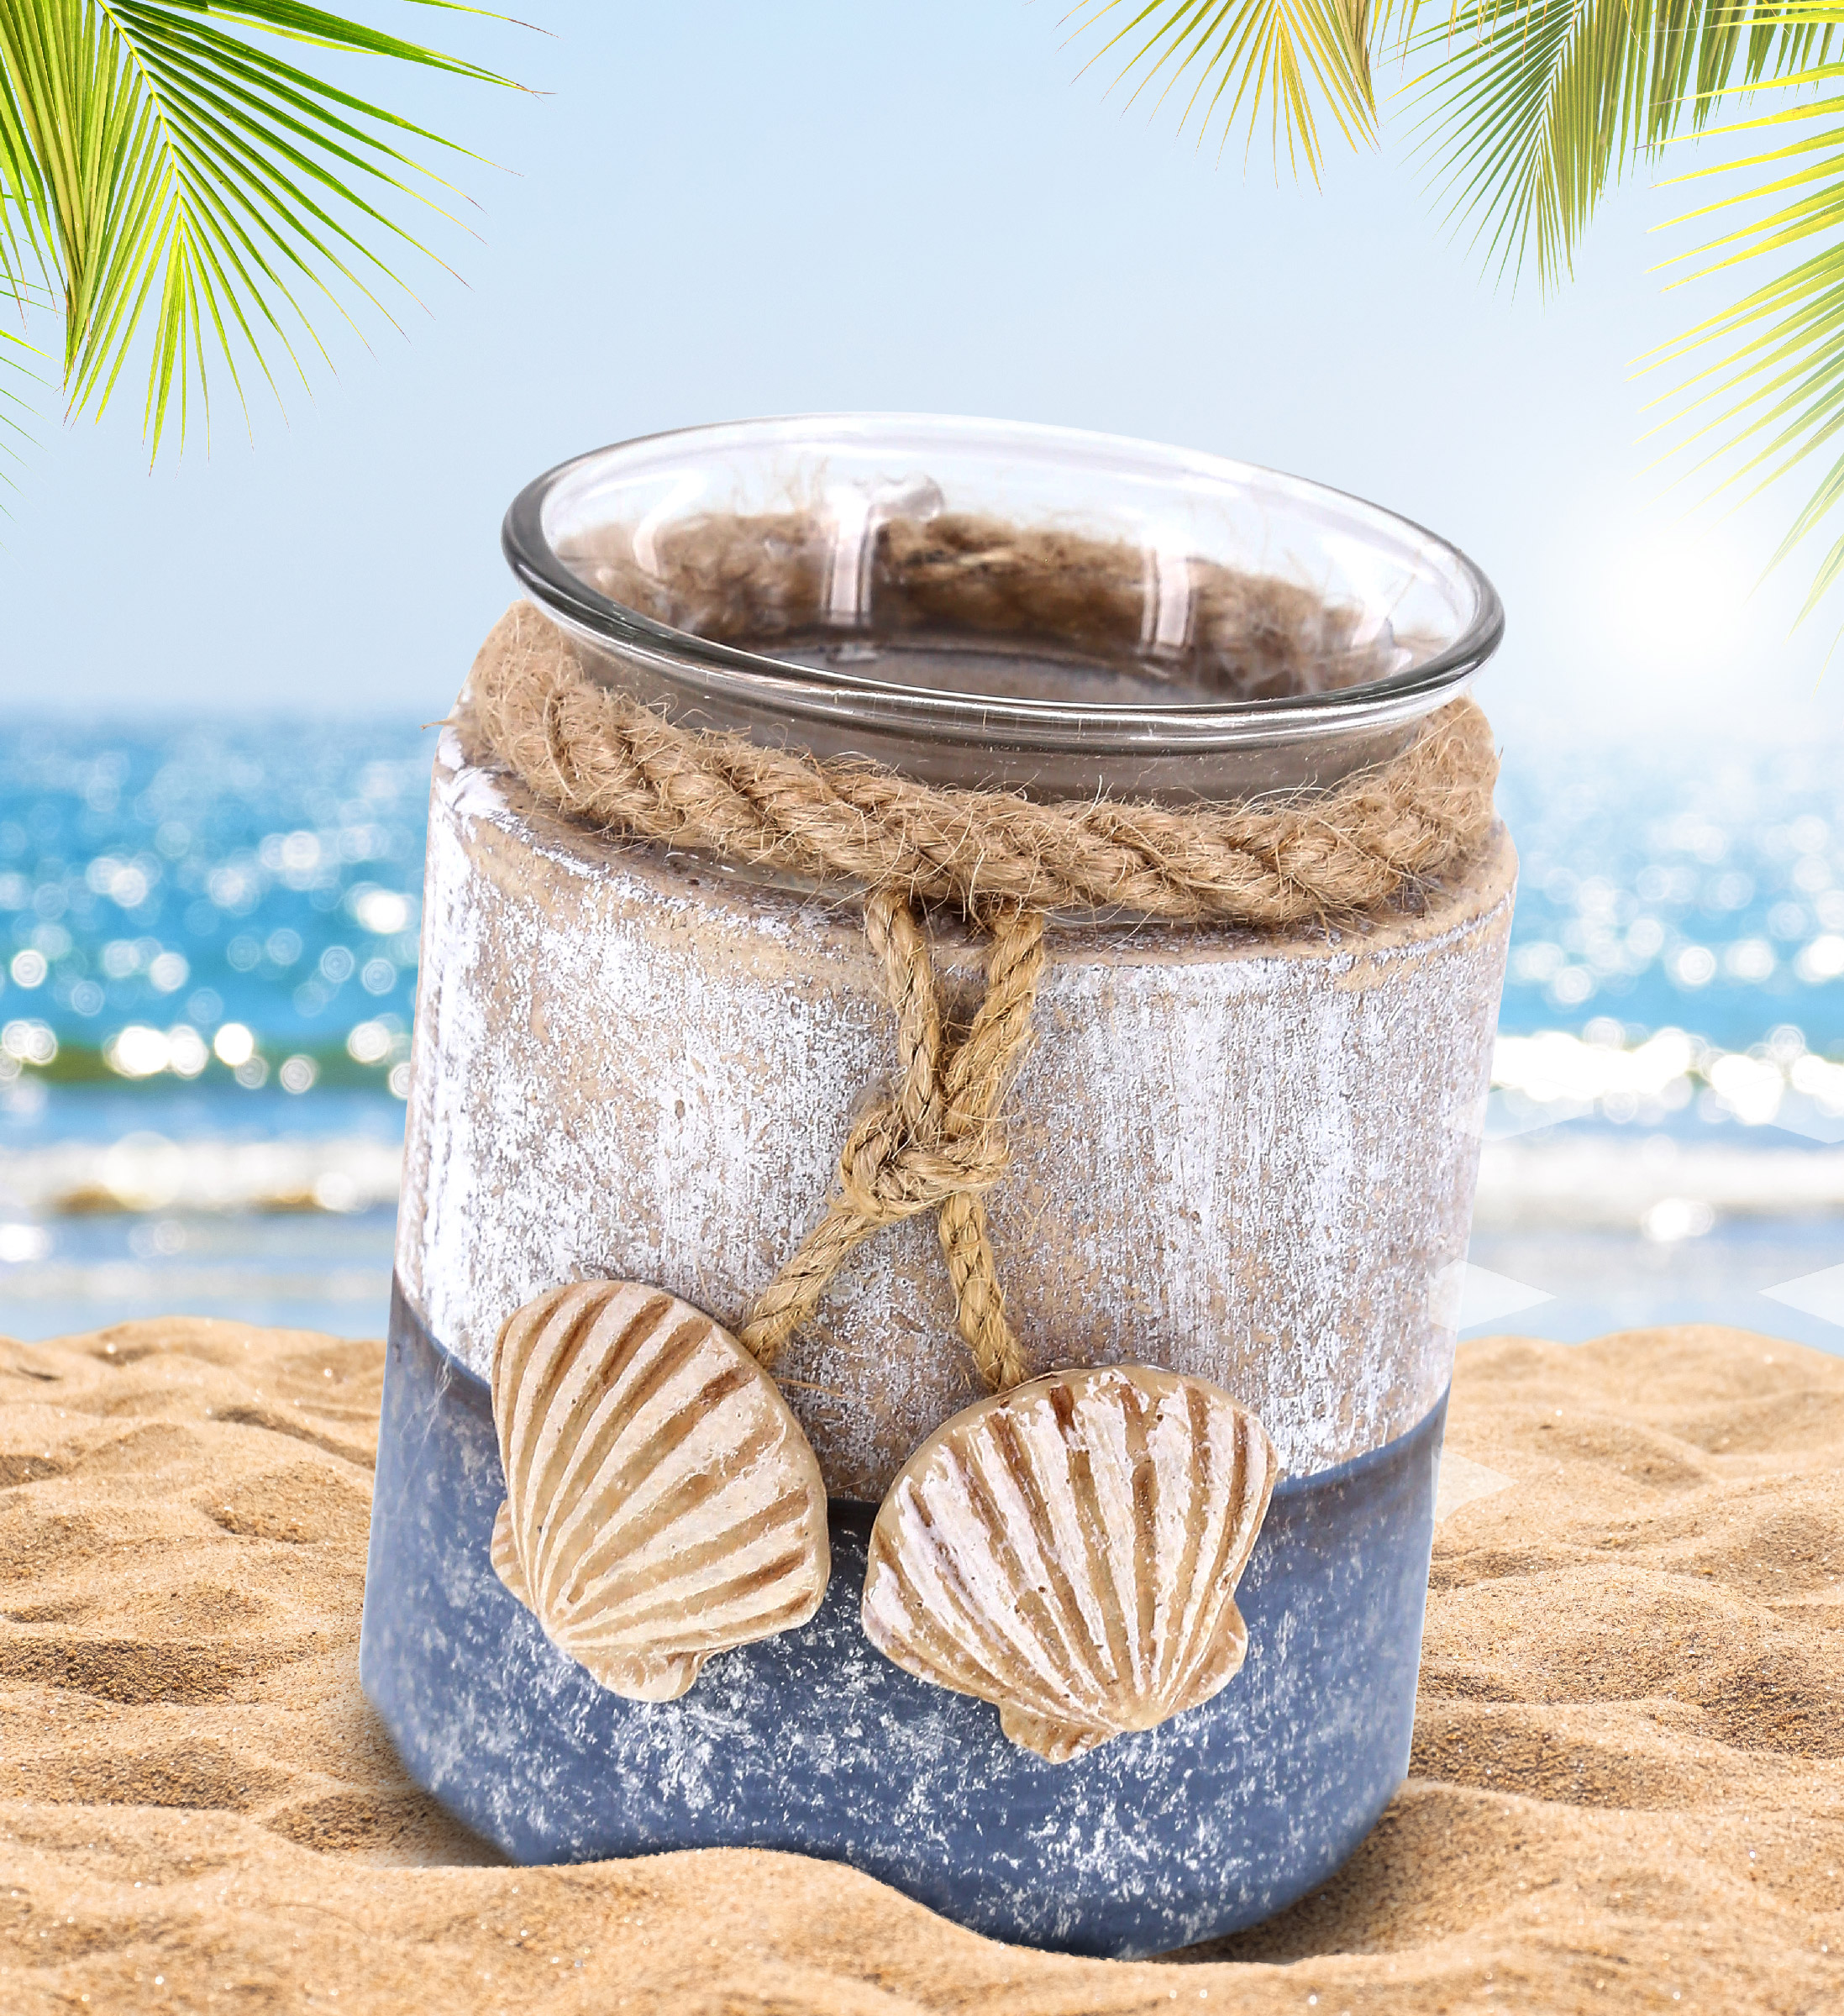 Cota Global Silver Sea Sea Shell Candle Holder - Nautical Table Top Centerpiece Coastal Decor for Home, Beach House, Rustic Decorative Candle with Sea